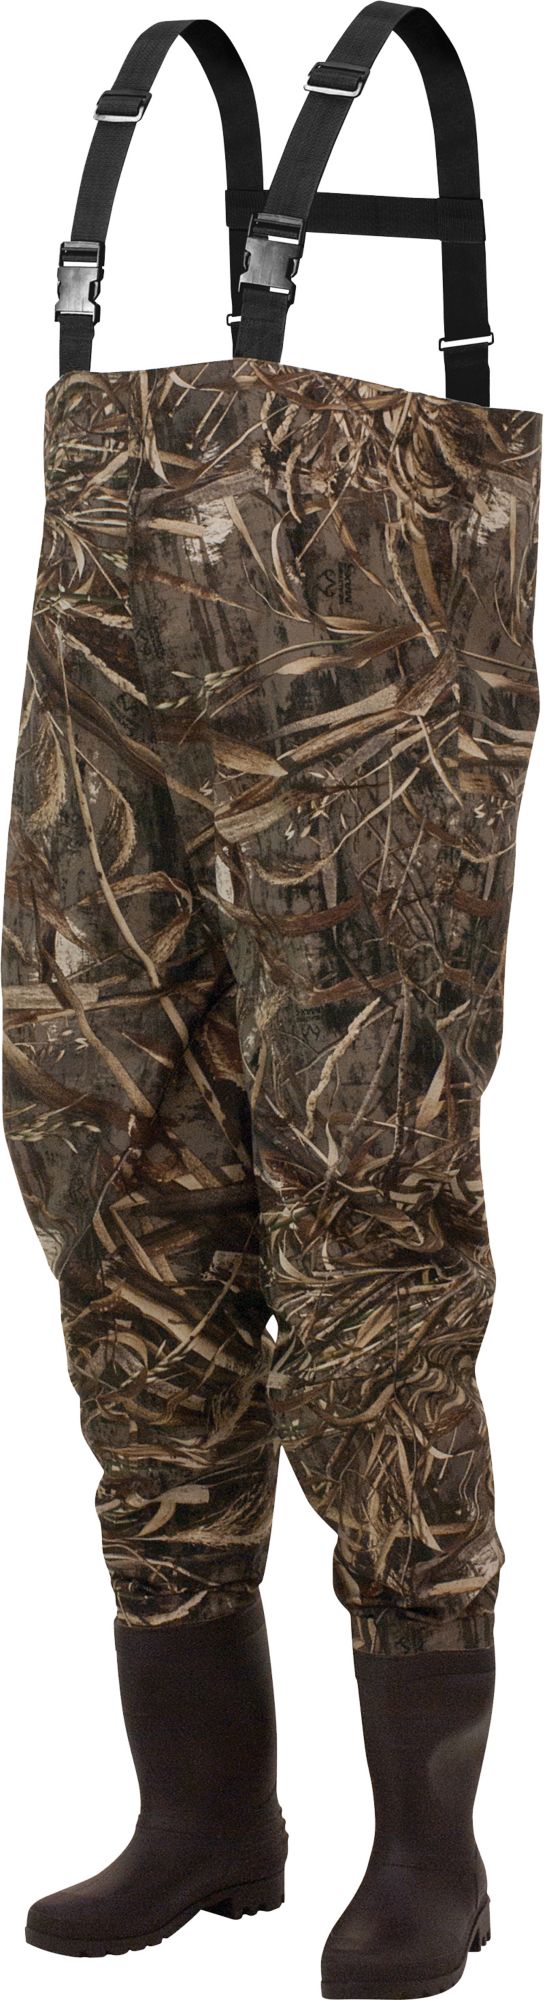 frogg toggs Rana II Camouflage Chest Waders, Men's, Size 9, Max-5